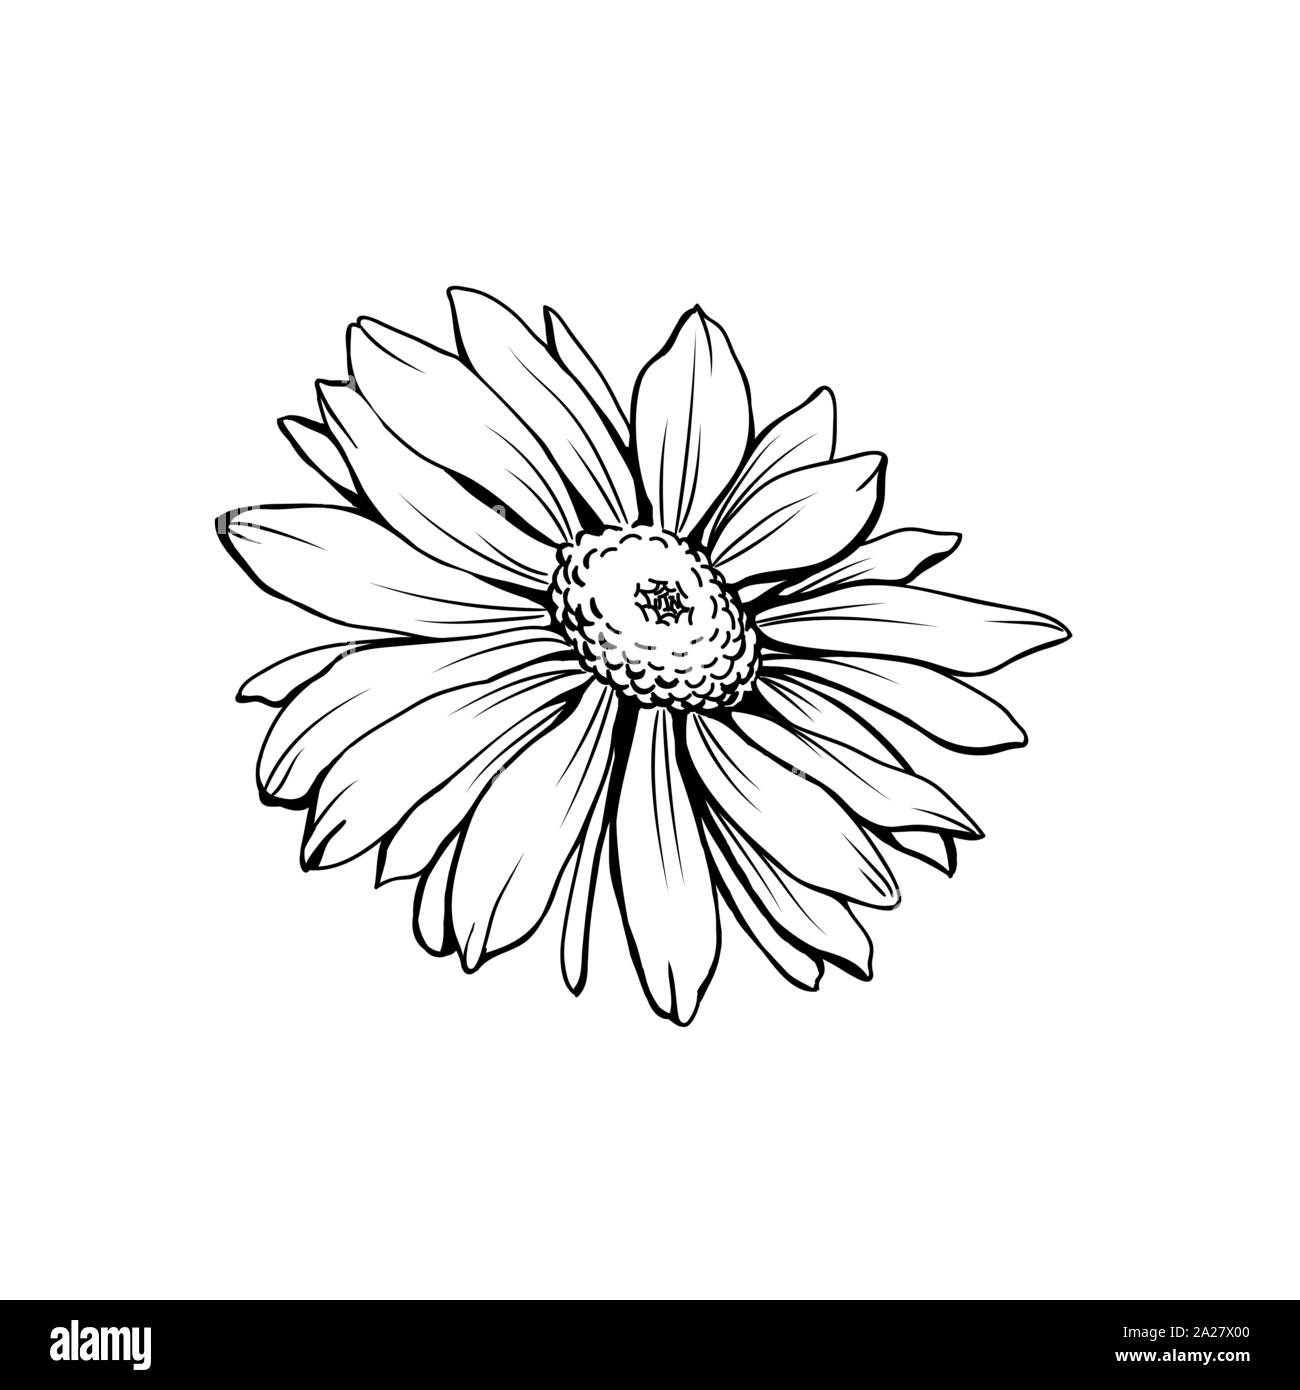 Daisy doodles Vectors & Illustrations for Free Download